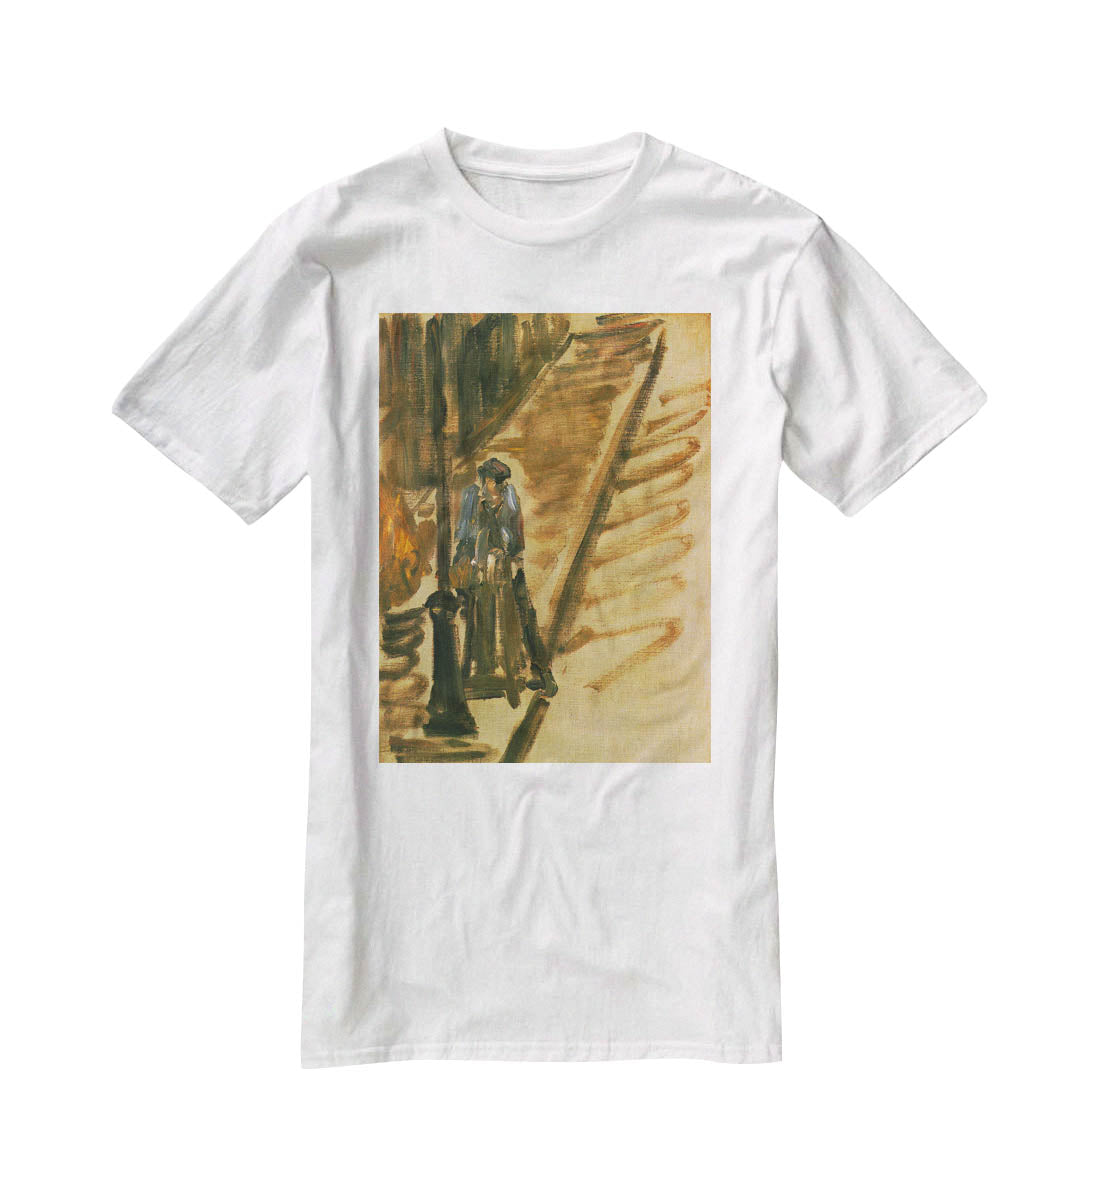 Rue Mossnier with Knife Grinder by Manet T-Shirt - Canvas Art Rocks - 5